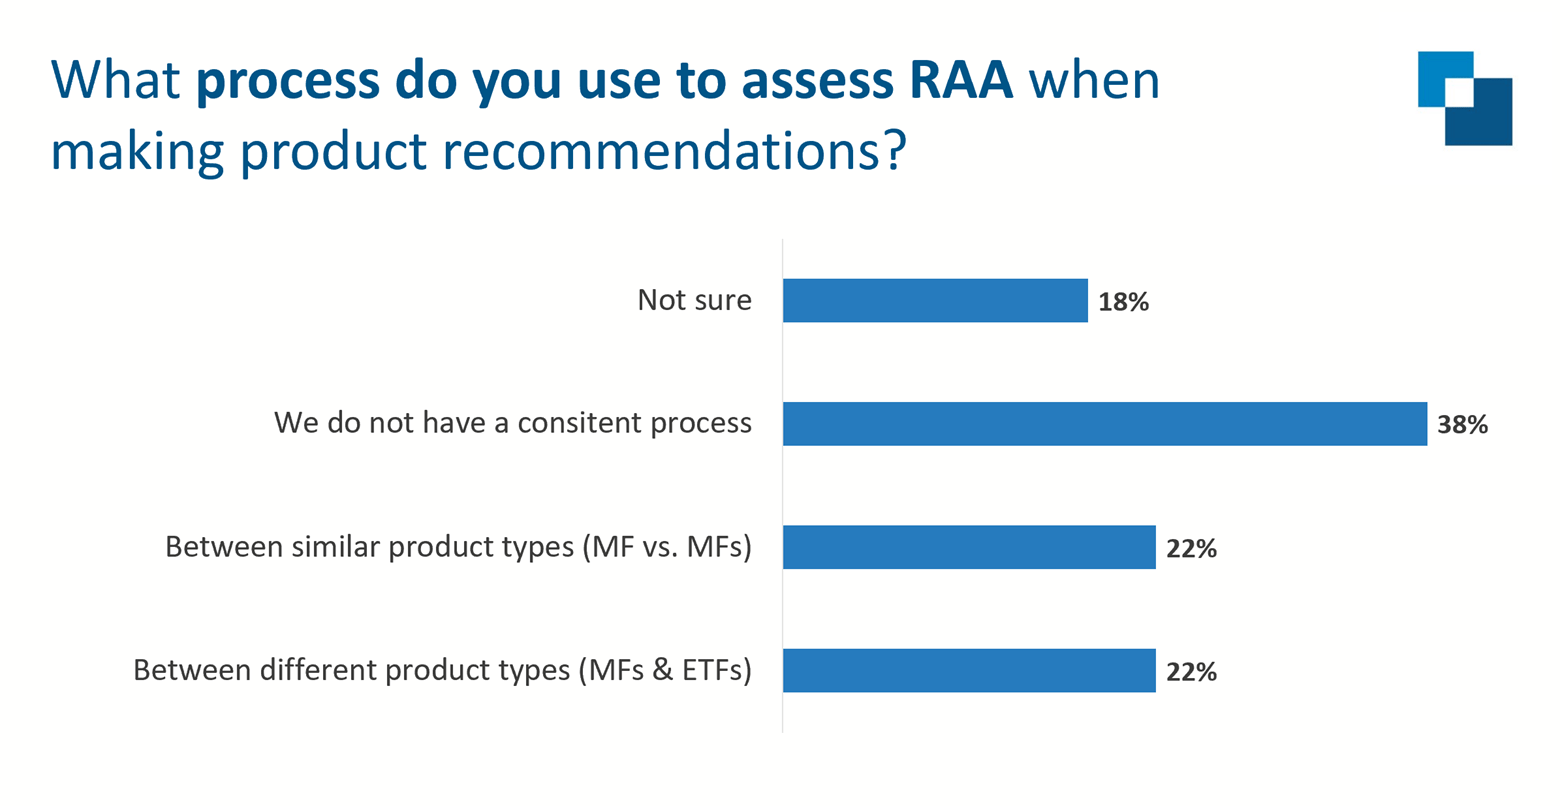 What process do you use to assess RAA when making product recommendations